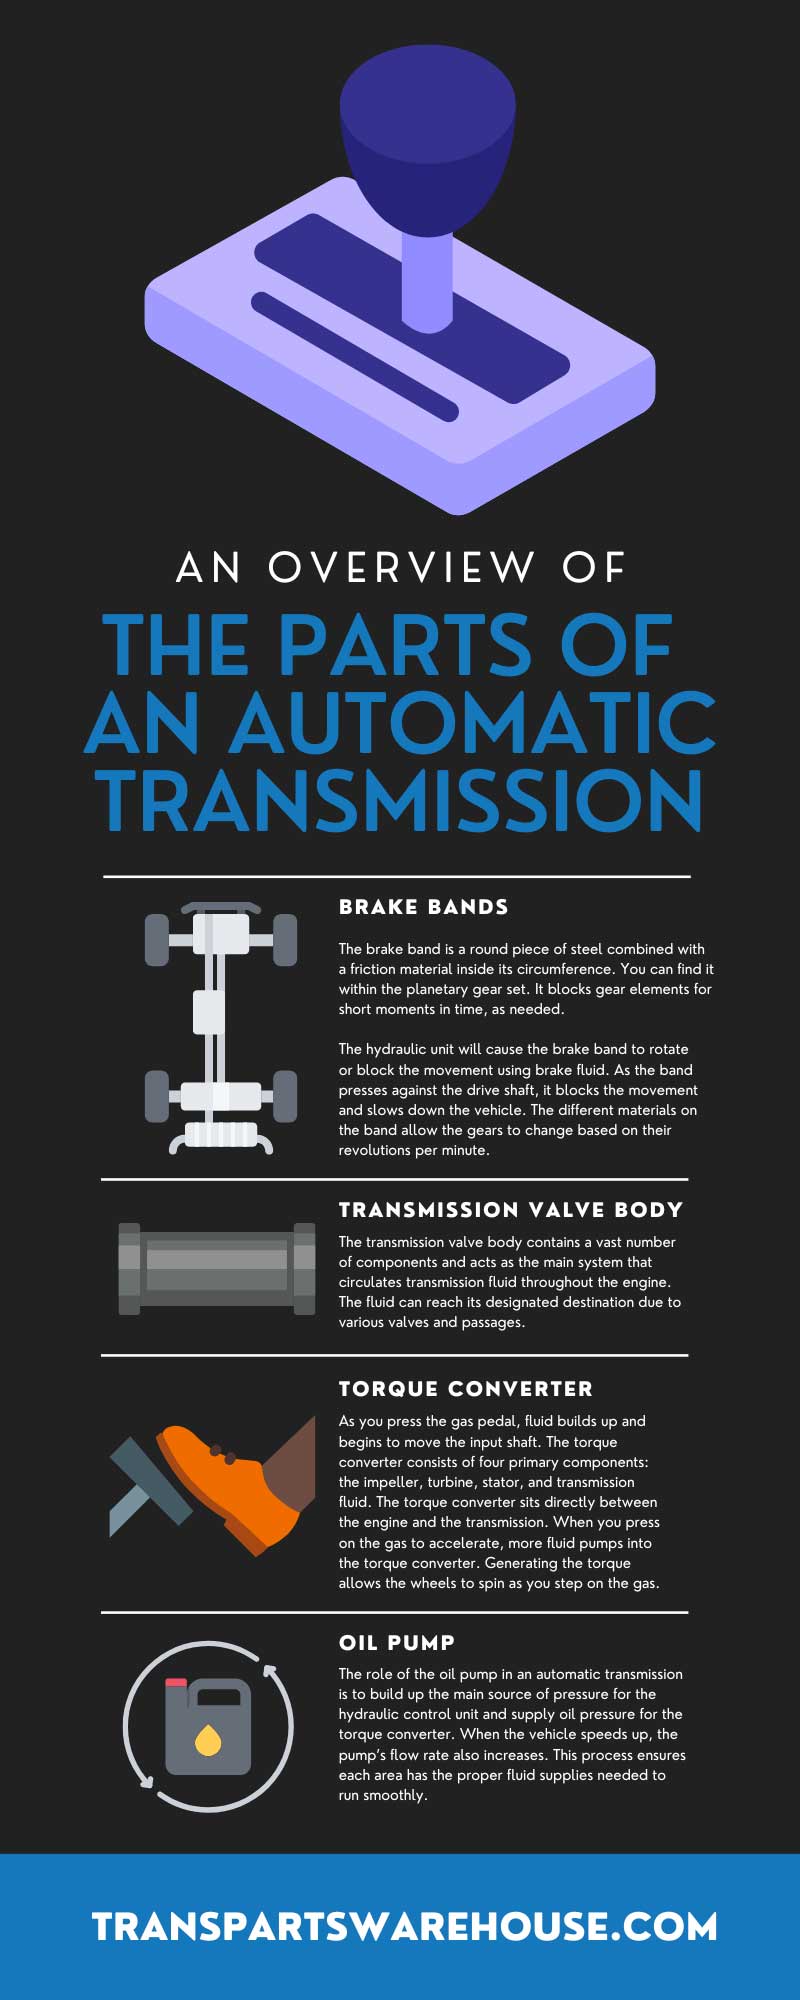 An Overview of the Parts of an Automatic Transmission